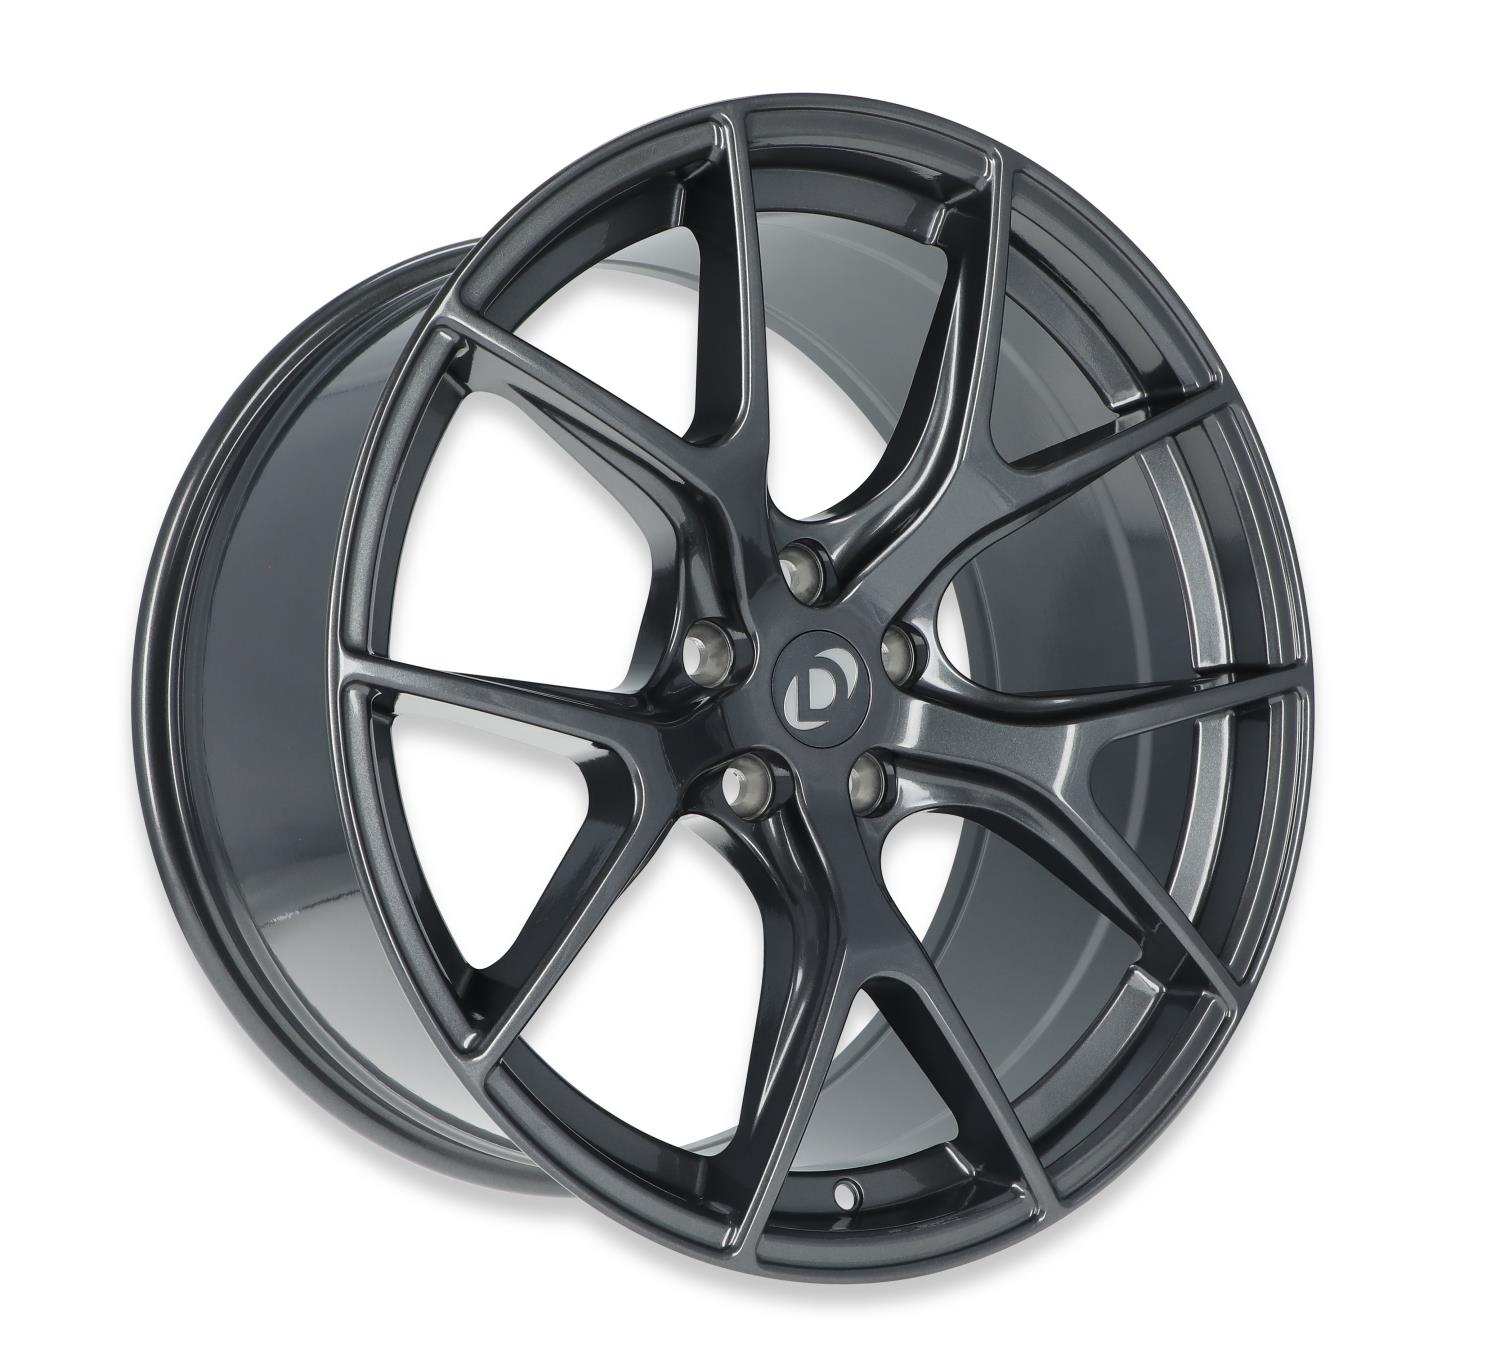 Dinan Hyper Kinetic Wheel, Size: 20x8.5", Bolt Pattern: 5x120mm, Backspace: 5.93" [Anthracite Finish with Clearcoat]